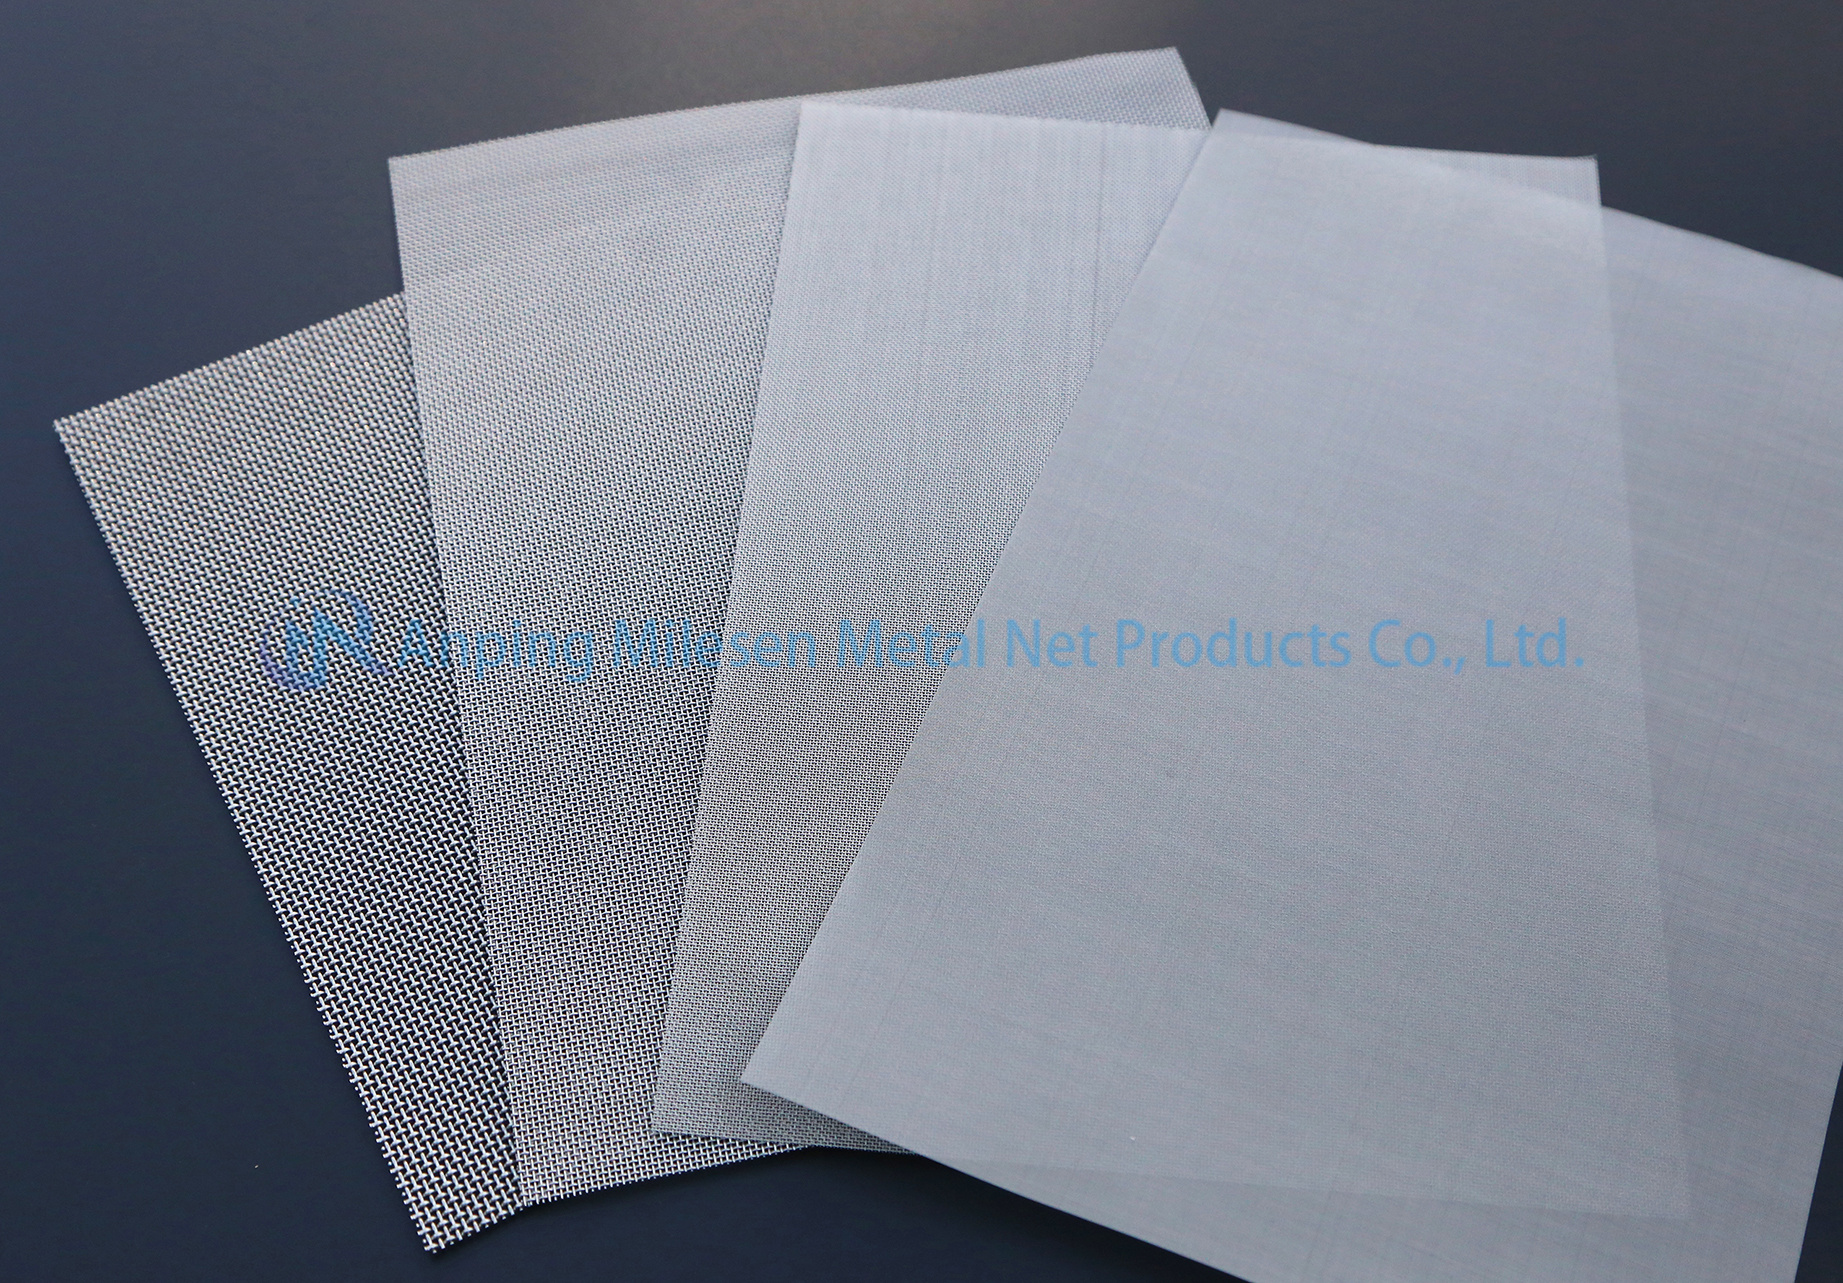 The specific classification of stainless steel wire mesh